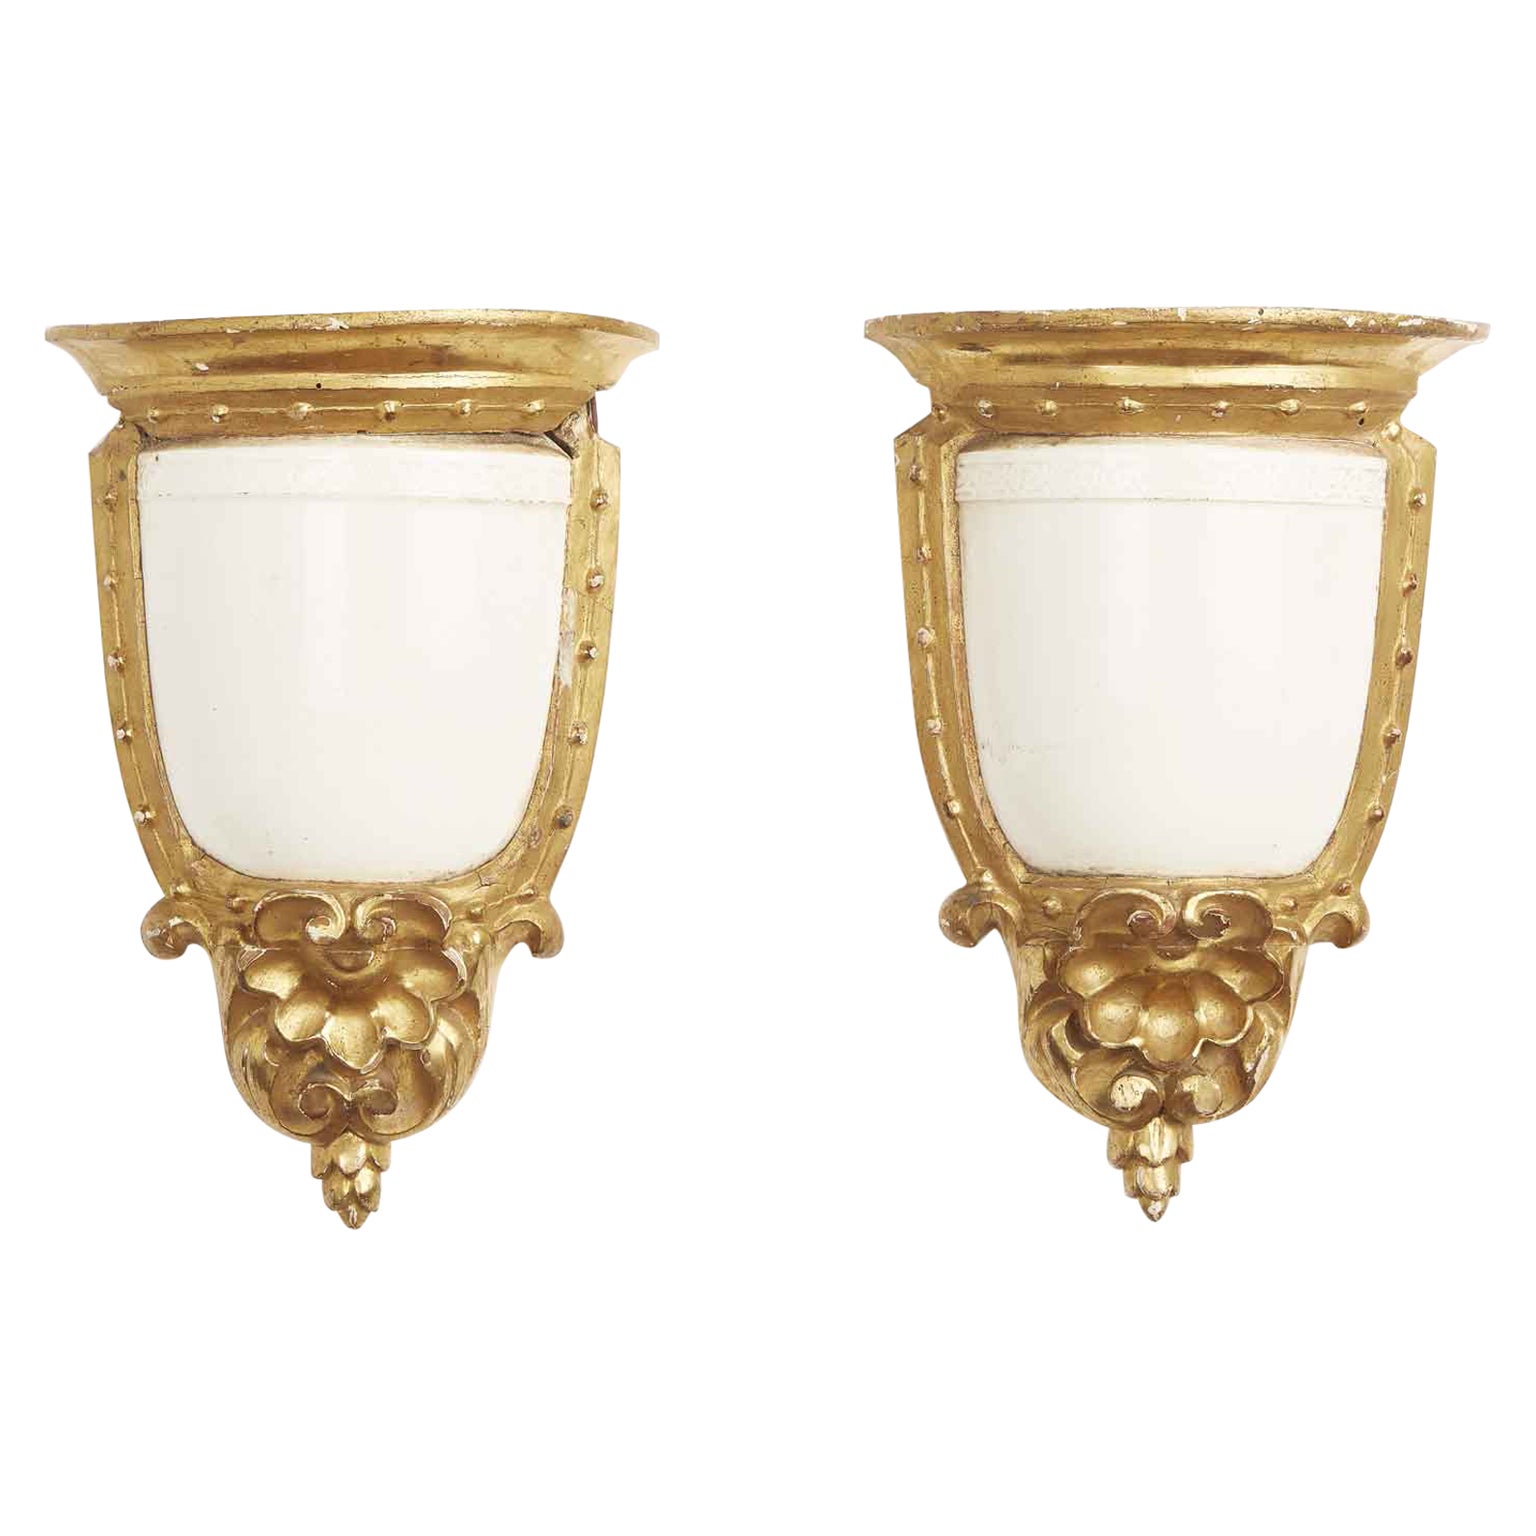 19th Century Italian Neoclassical Majolica Pair of Wall Brackets for Sconces For Sale